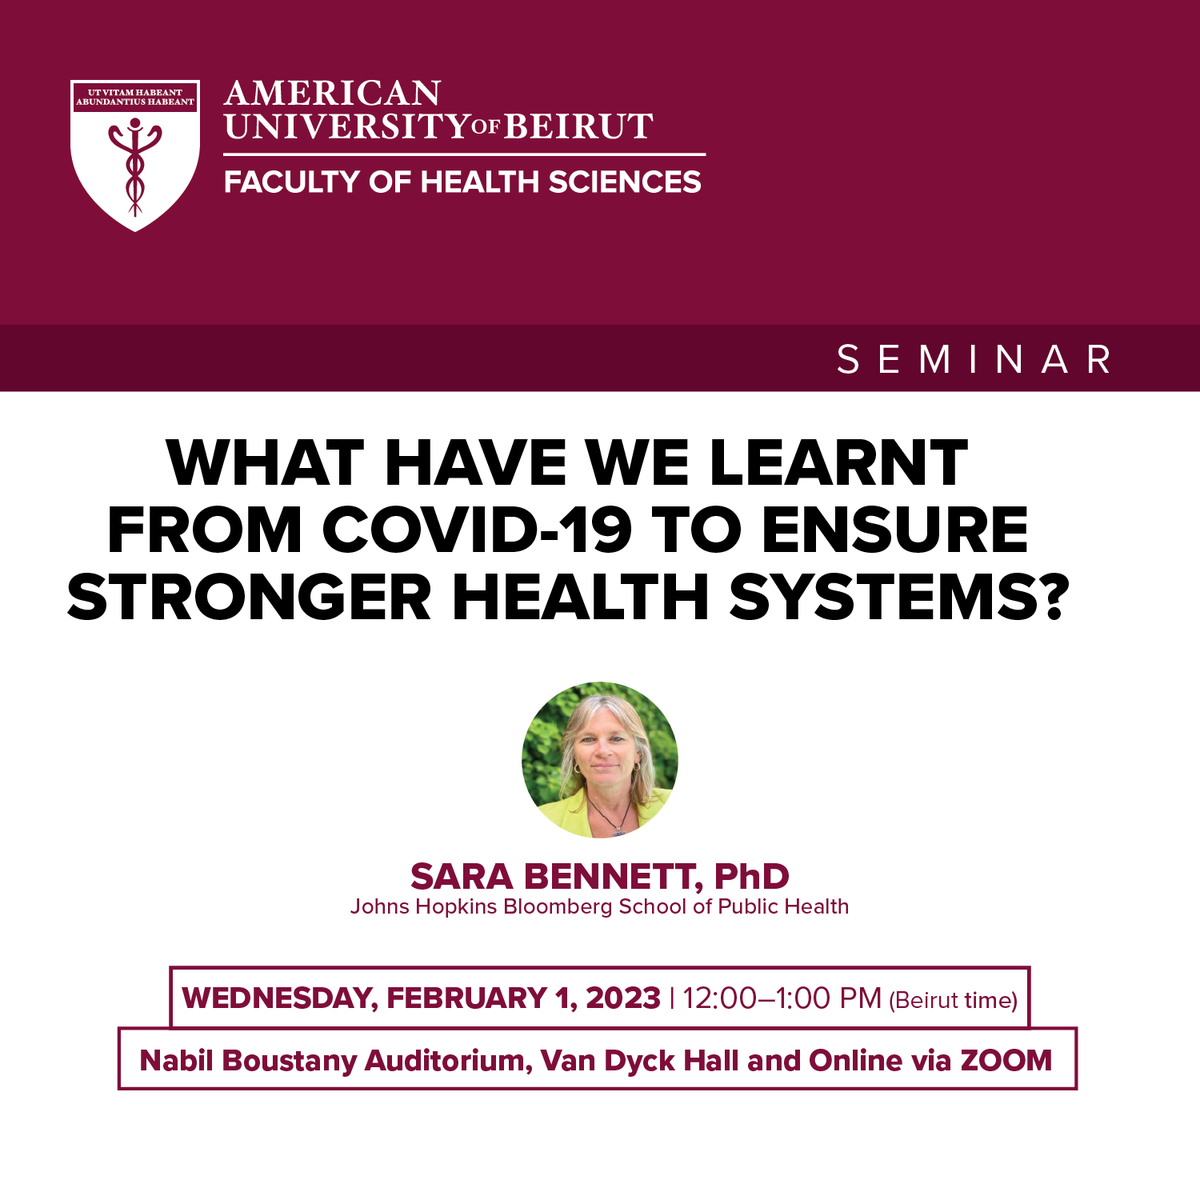 Join #FHS_Seminar with Dr. Sara Bennett from @HopkinsIHHS to know more about the lessons that can be drawn from the Covid-19 experience. #AUB #FHS_Seminar #COVID19 #FHS More info: bit.ly/3wSiOY5 @AUB_Lebanon @saracbennett @JohnsHopkinsSPH